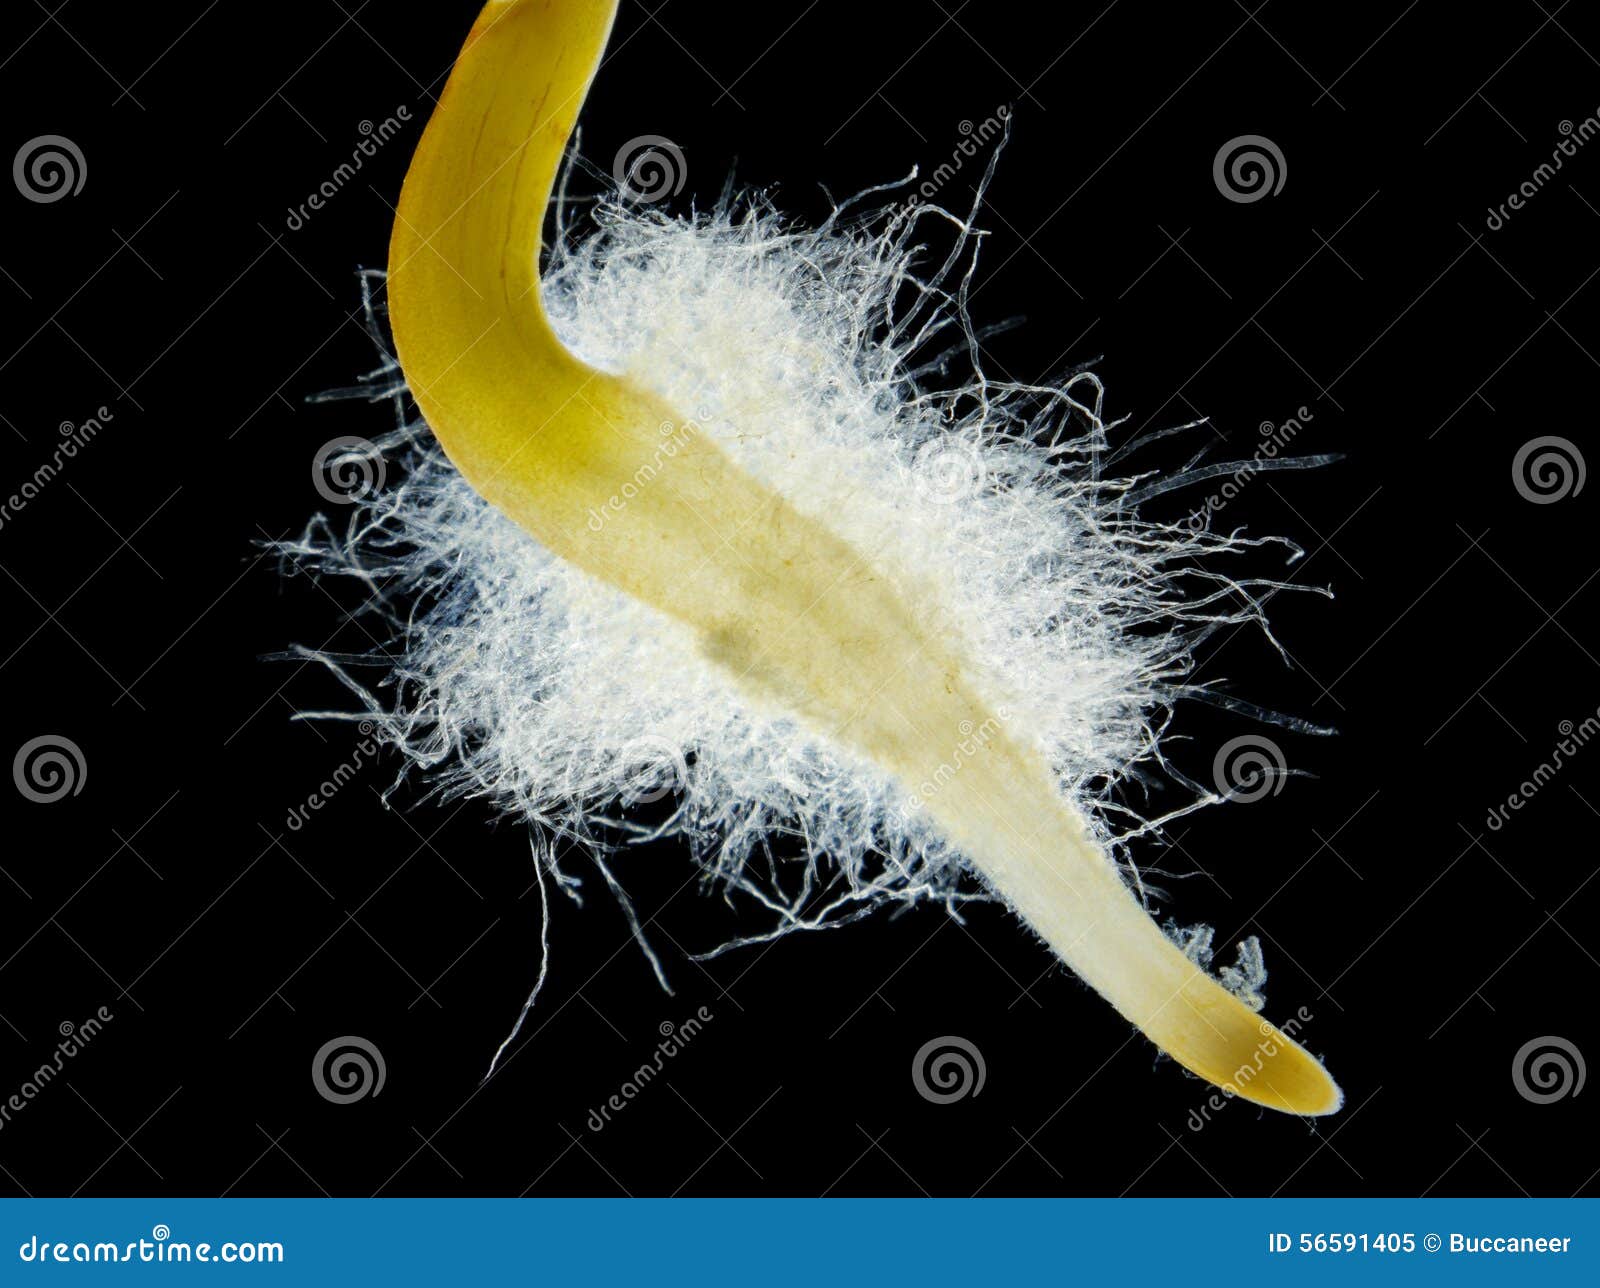 Chili Pepper (Capsicum Annuum) Seedling Root Hair Stock Image - Image of  detail, magnify: 56591405